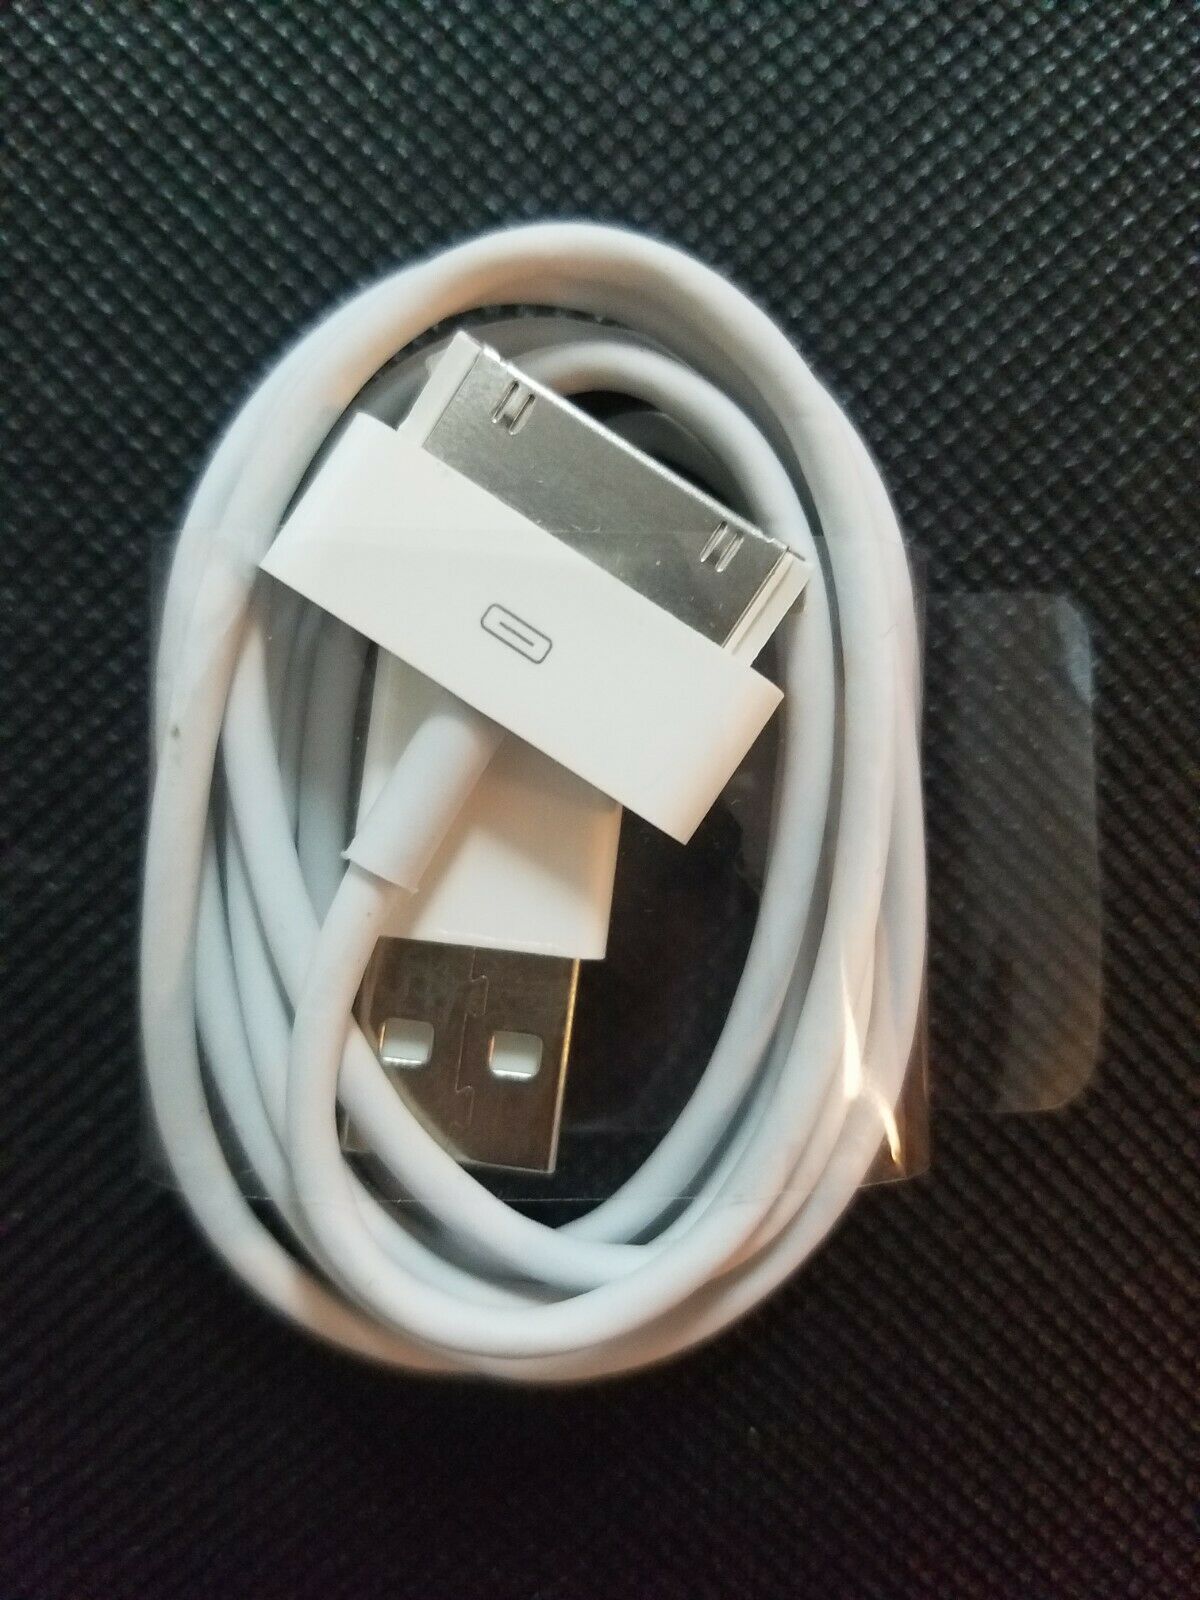 For Apple Ipad 1/2/3 Premium Usb Sync Data Cable Charger